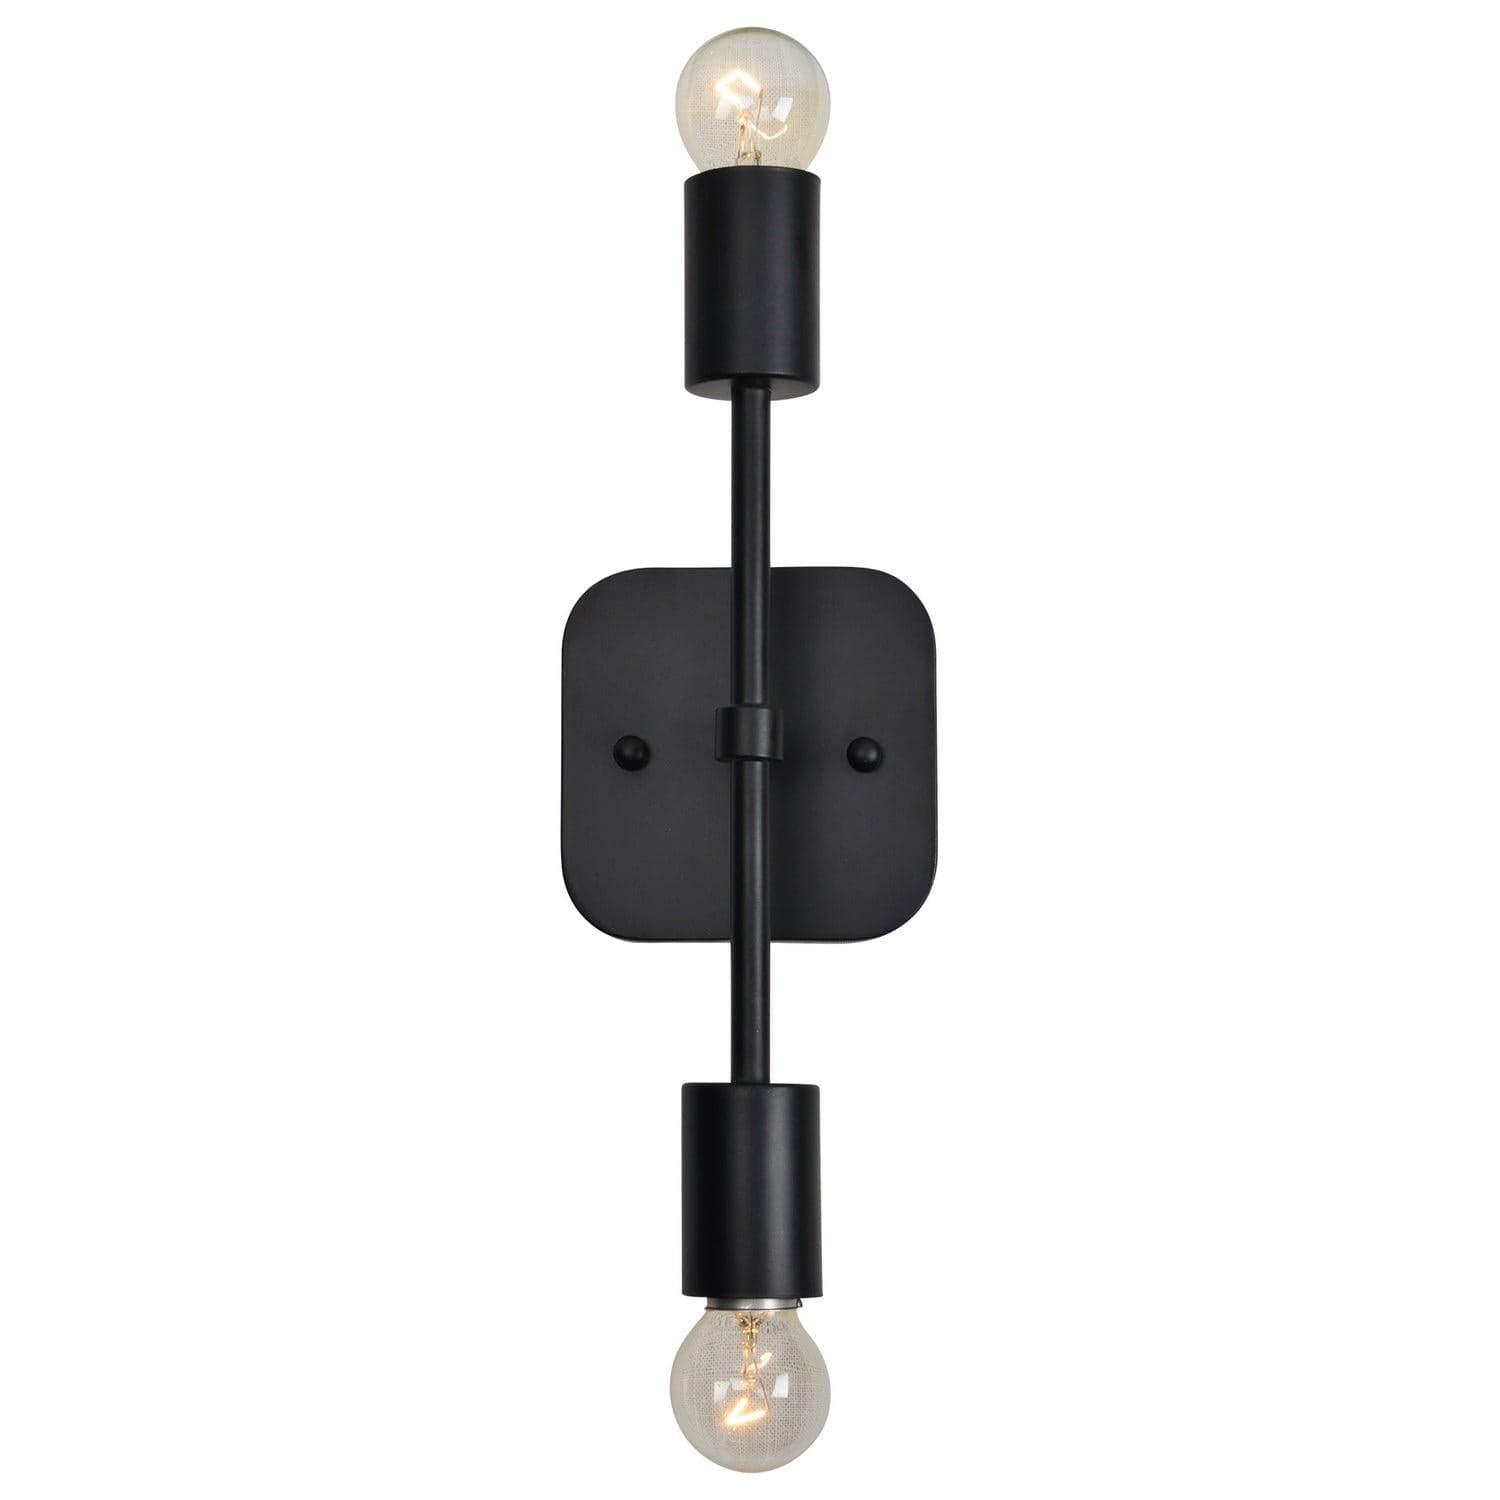 Renwil - Albany I Wall Sconce - WS008 | Montreal Lighting & Hardware